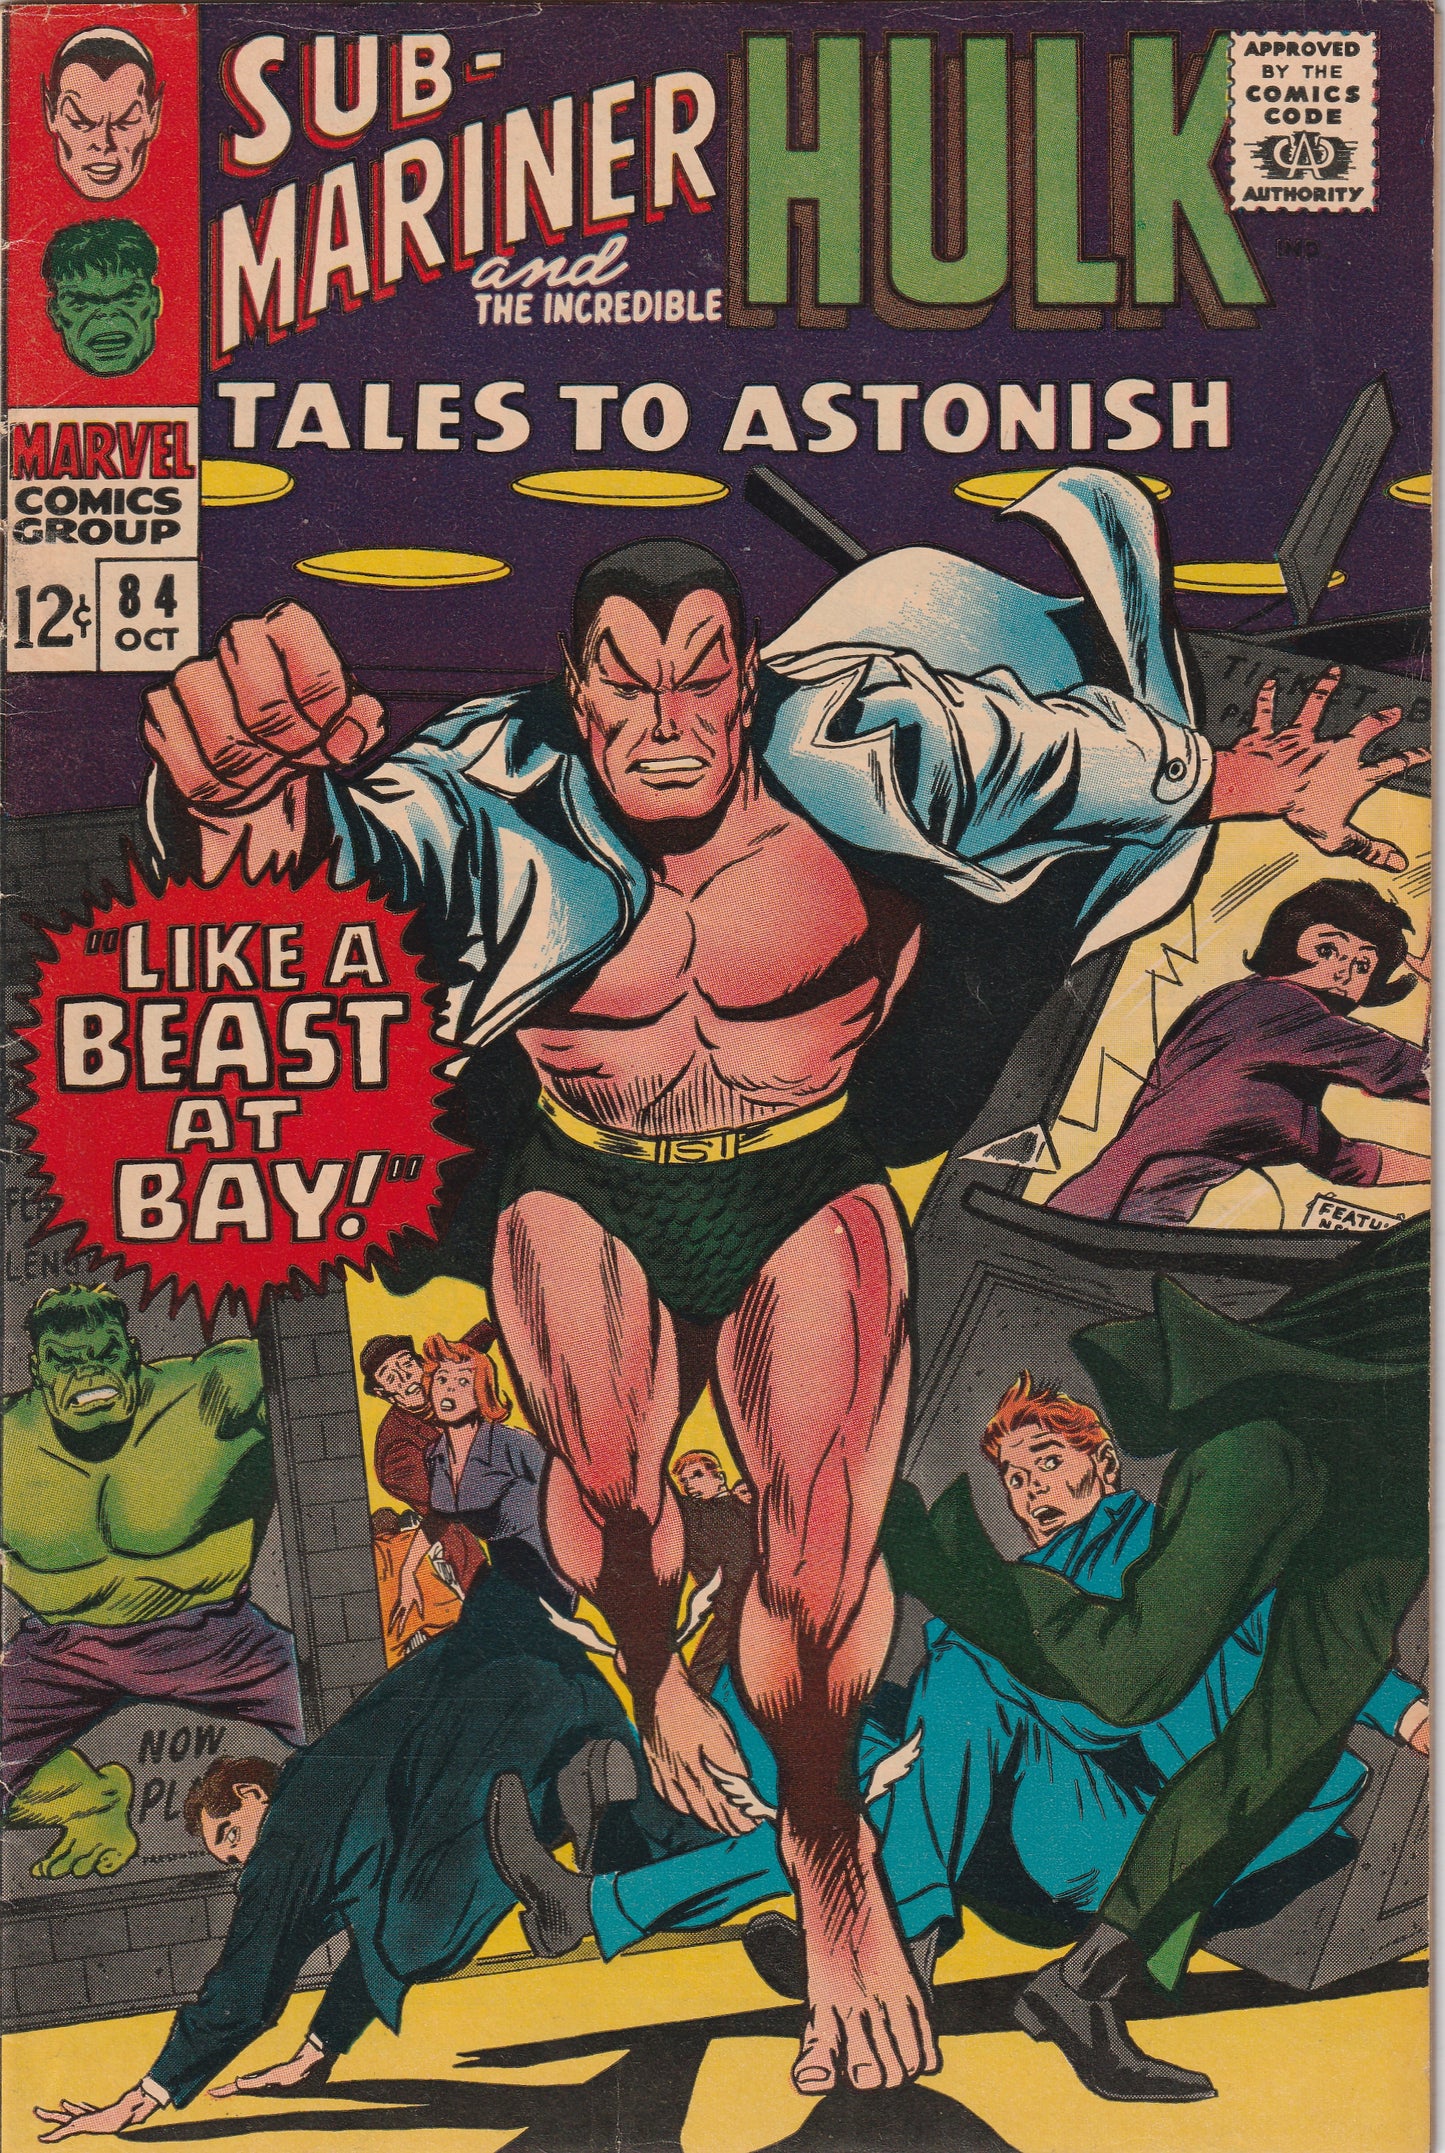 Tales To Astonish #84 (1966) - Featuring Sub-Mariner and Incredible Hulk